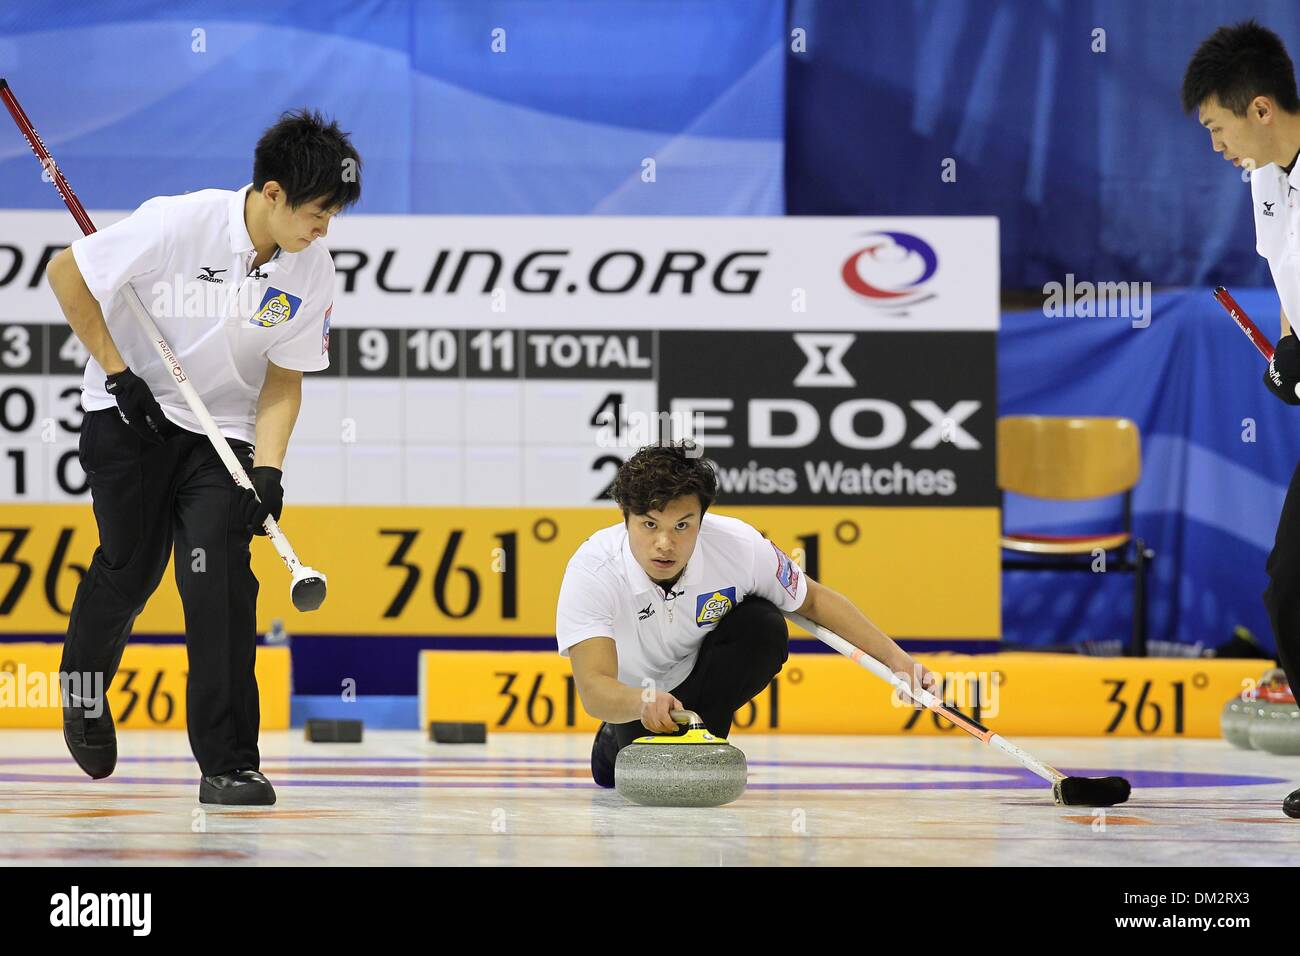 Arena Fuessen, Germany. 10th Dec, 2013. Japanes curlers Kosuke Morozumi (L-R), Tsuyoshi Yamaguchi and Tetsuro Shimizu compete against South Korea during the Olympic Qualification in Arena Fuessen, Germany, 10 December 2013. Photo: Karl-Josef Hildenbrand/dpa/Alamy Live News Stock Photo